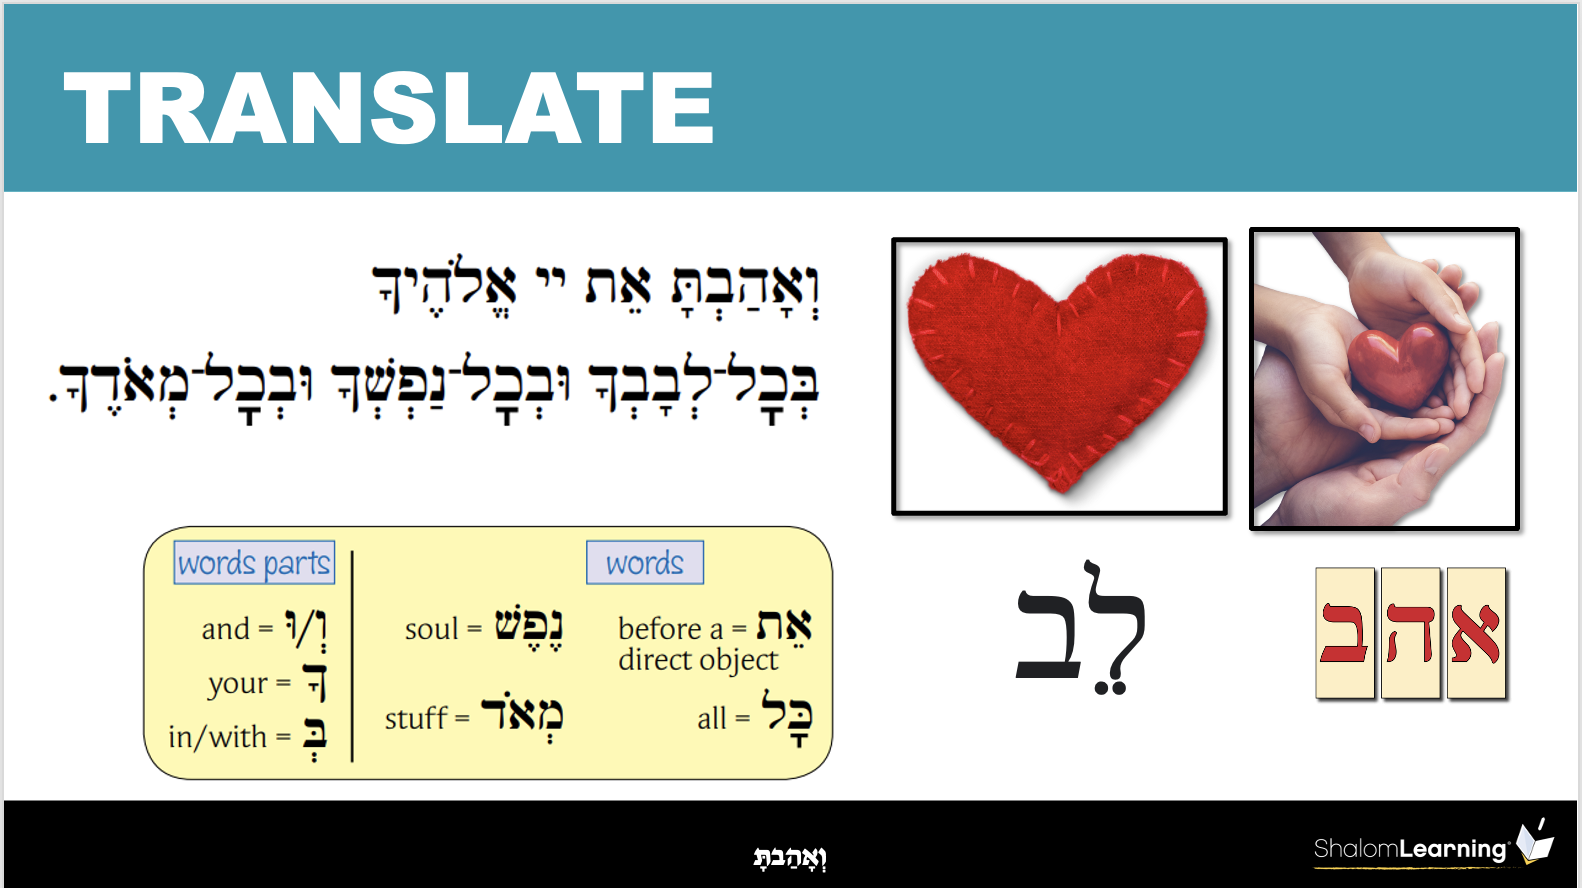 Tefillot Prayer slide example breaking down words and word parts